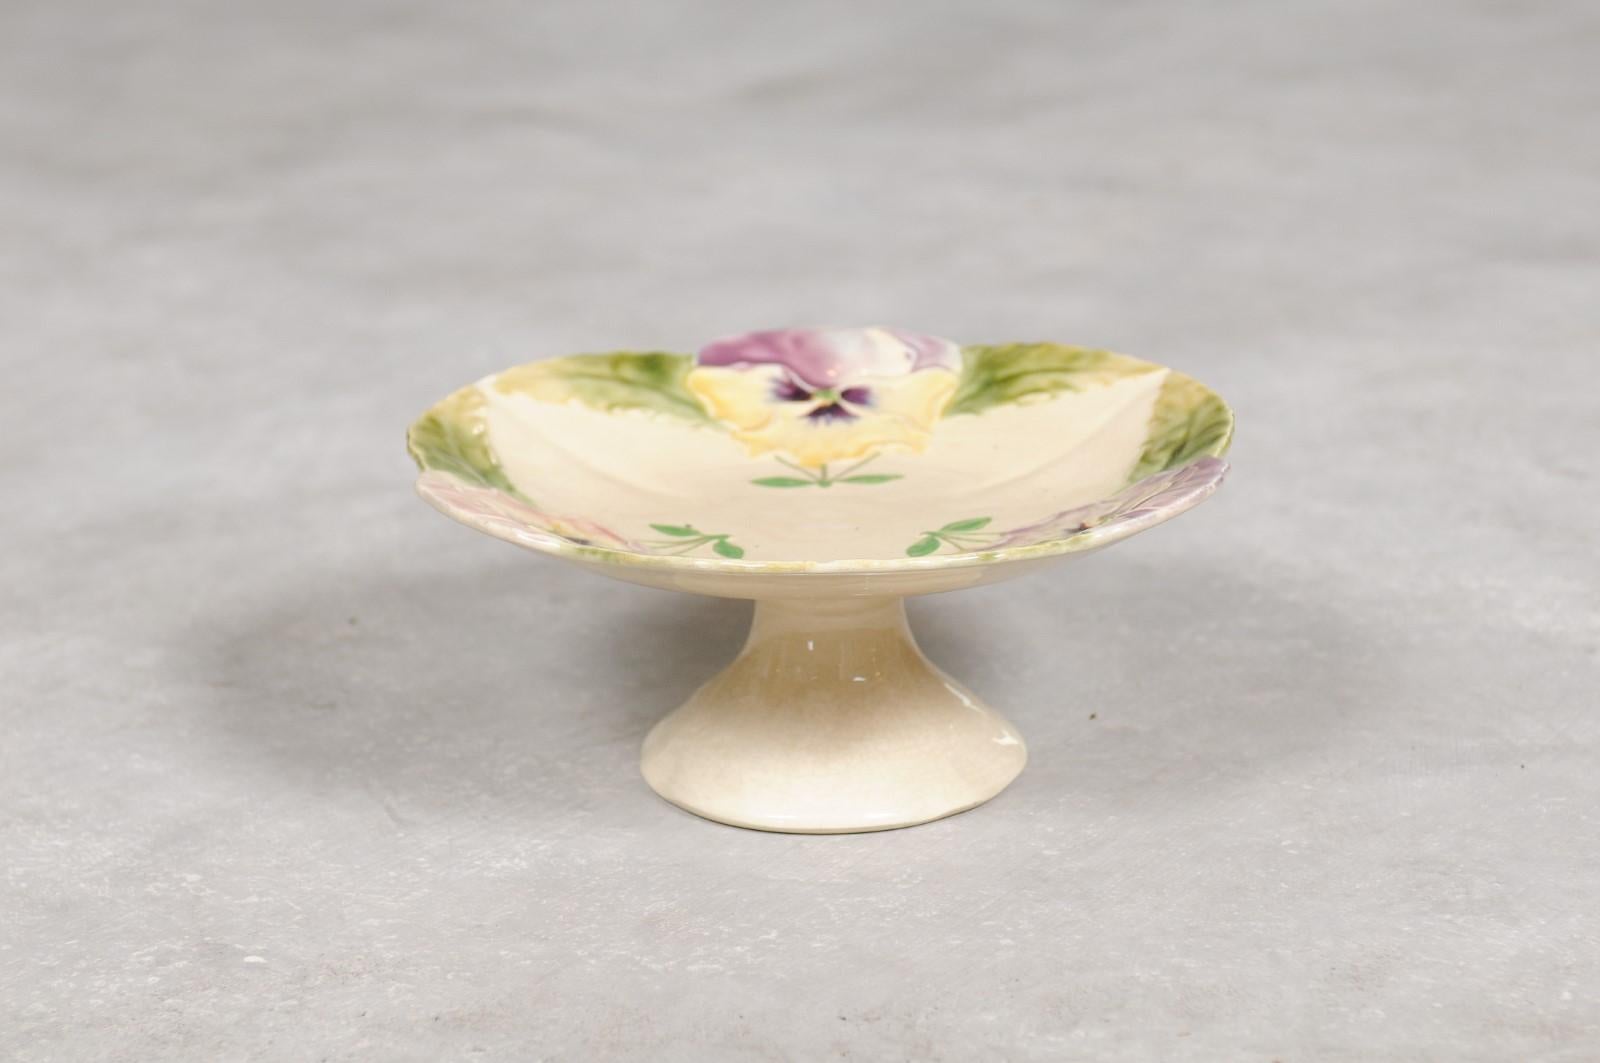 A French majolica compote from the 19th century with pansies and scalloped edge. Born in France during the 19th century, this compote features a décor of delicate purple pansies adorning the compote's scalloped edge. Flanked with their green leaves,